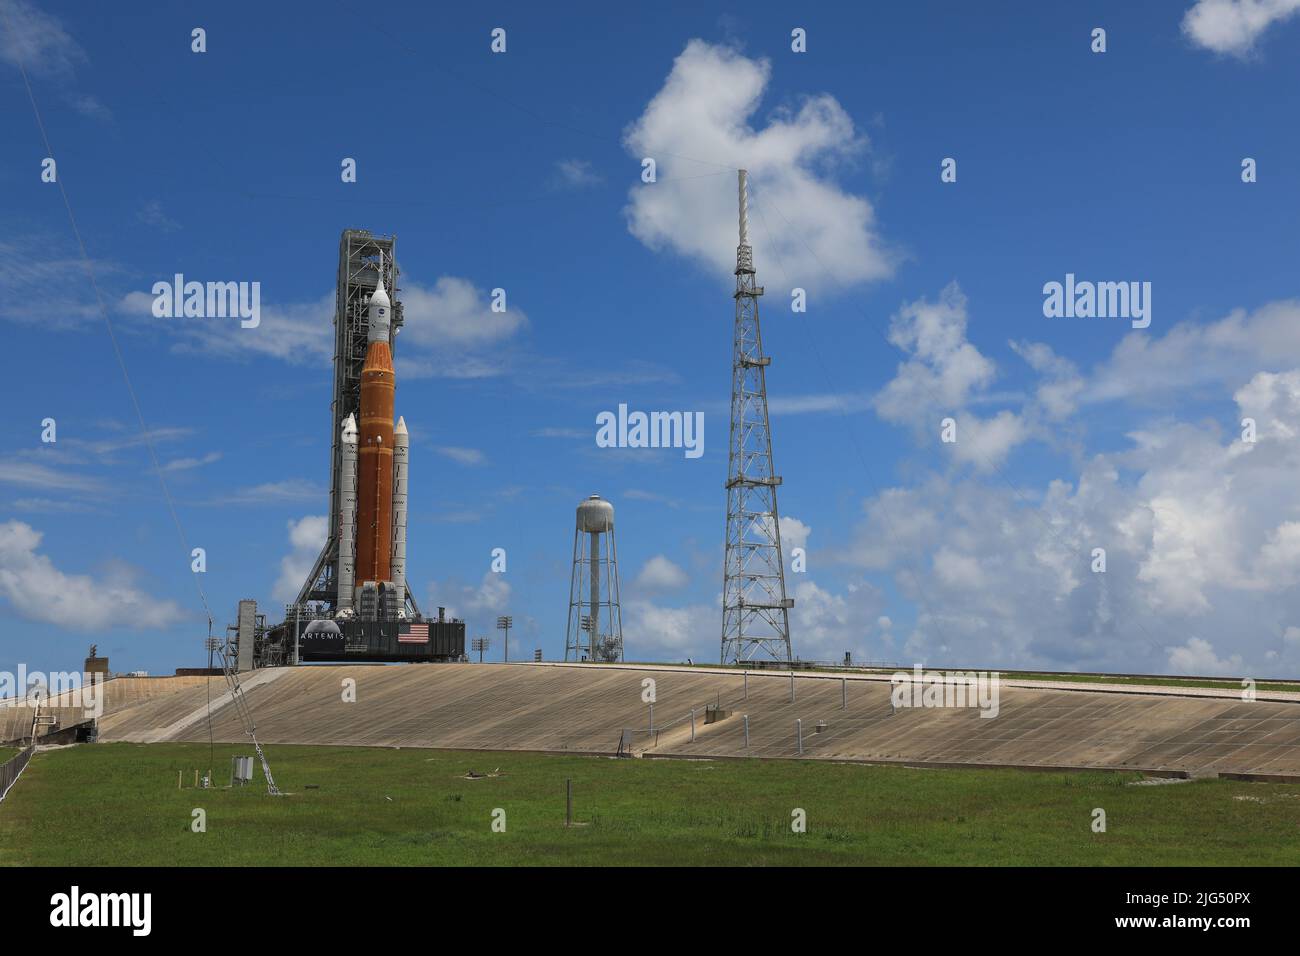 The NASA Artemis I Space Launch System rocket with the Orion spacecraft aboard is rolled out atop a mobile launcher at Launch Complex 39B, at the Kennedy Space Center, June 30, 2022, in Cape Canaveral, Florida. The SLS and Orion were transported to the pad on crawler-transporter 2 for a prelaunch test called a wet dress rehearsal. Stock Photo